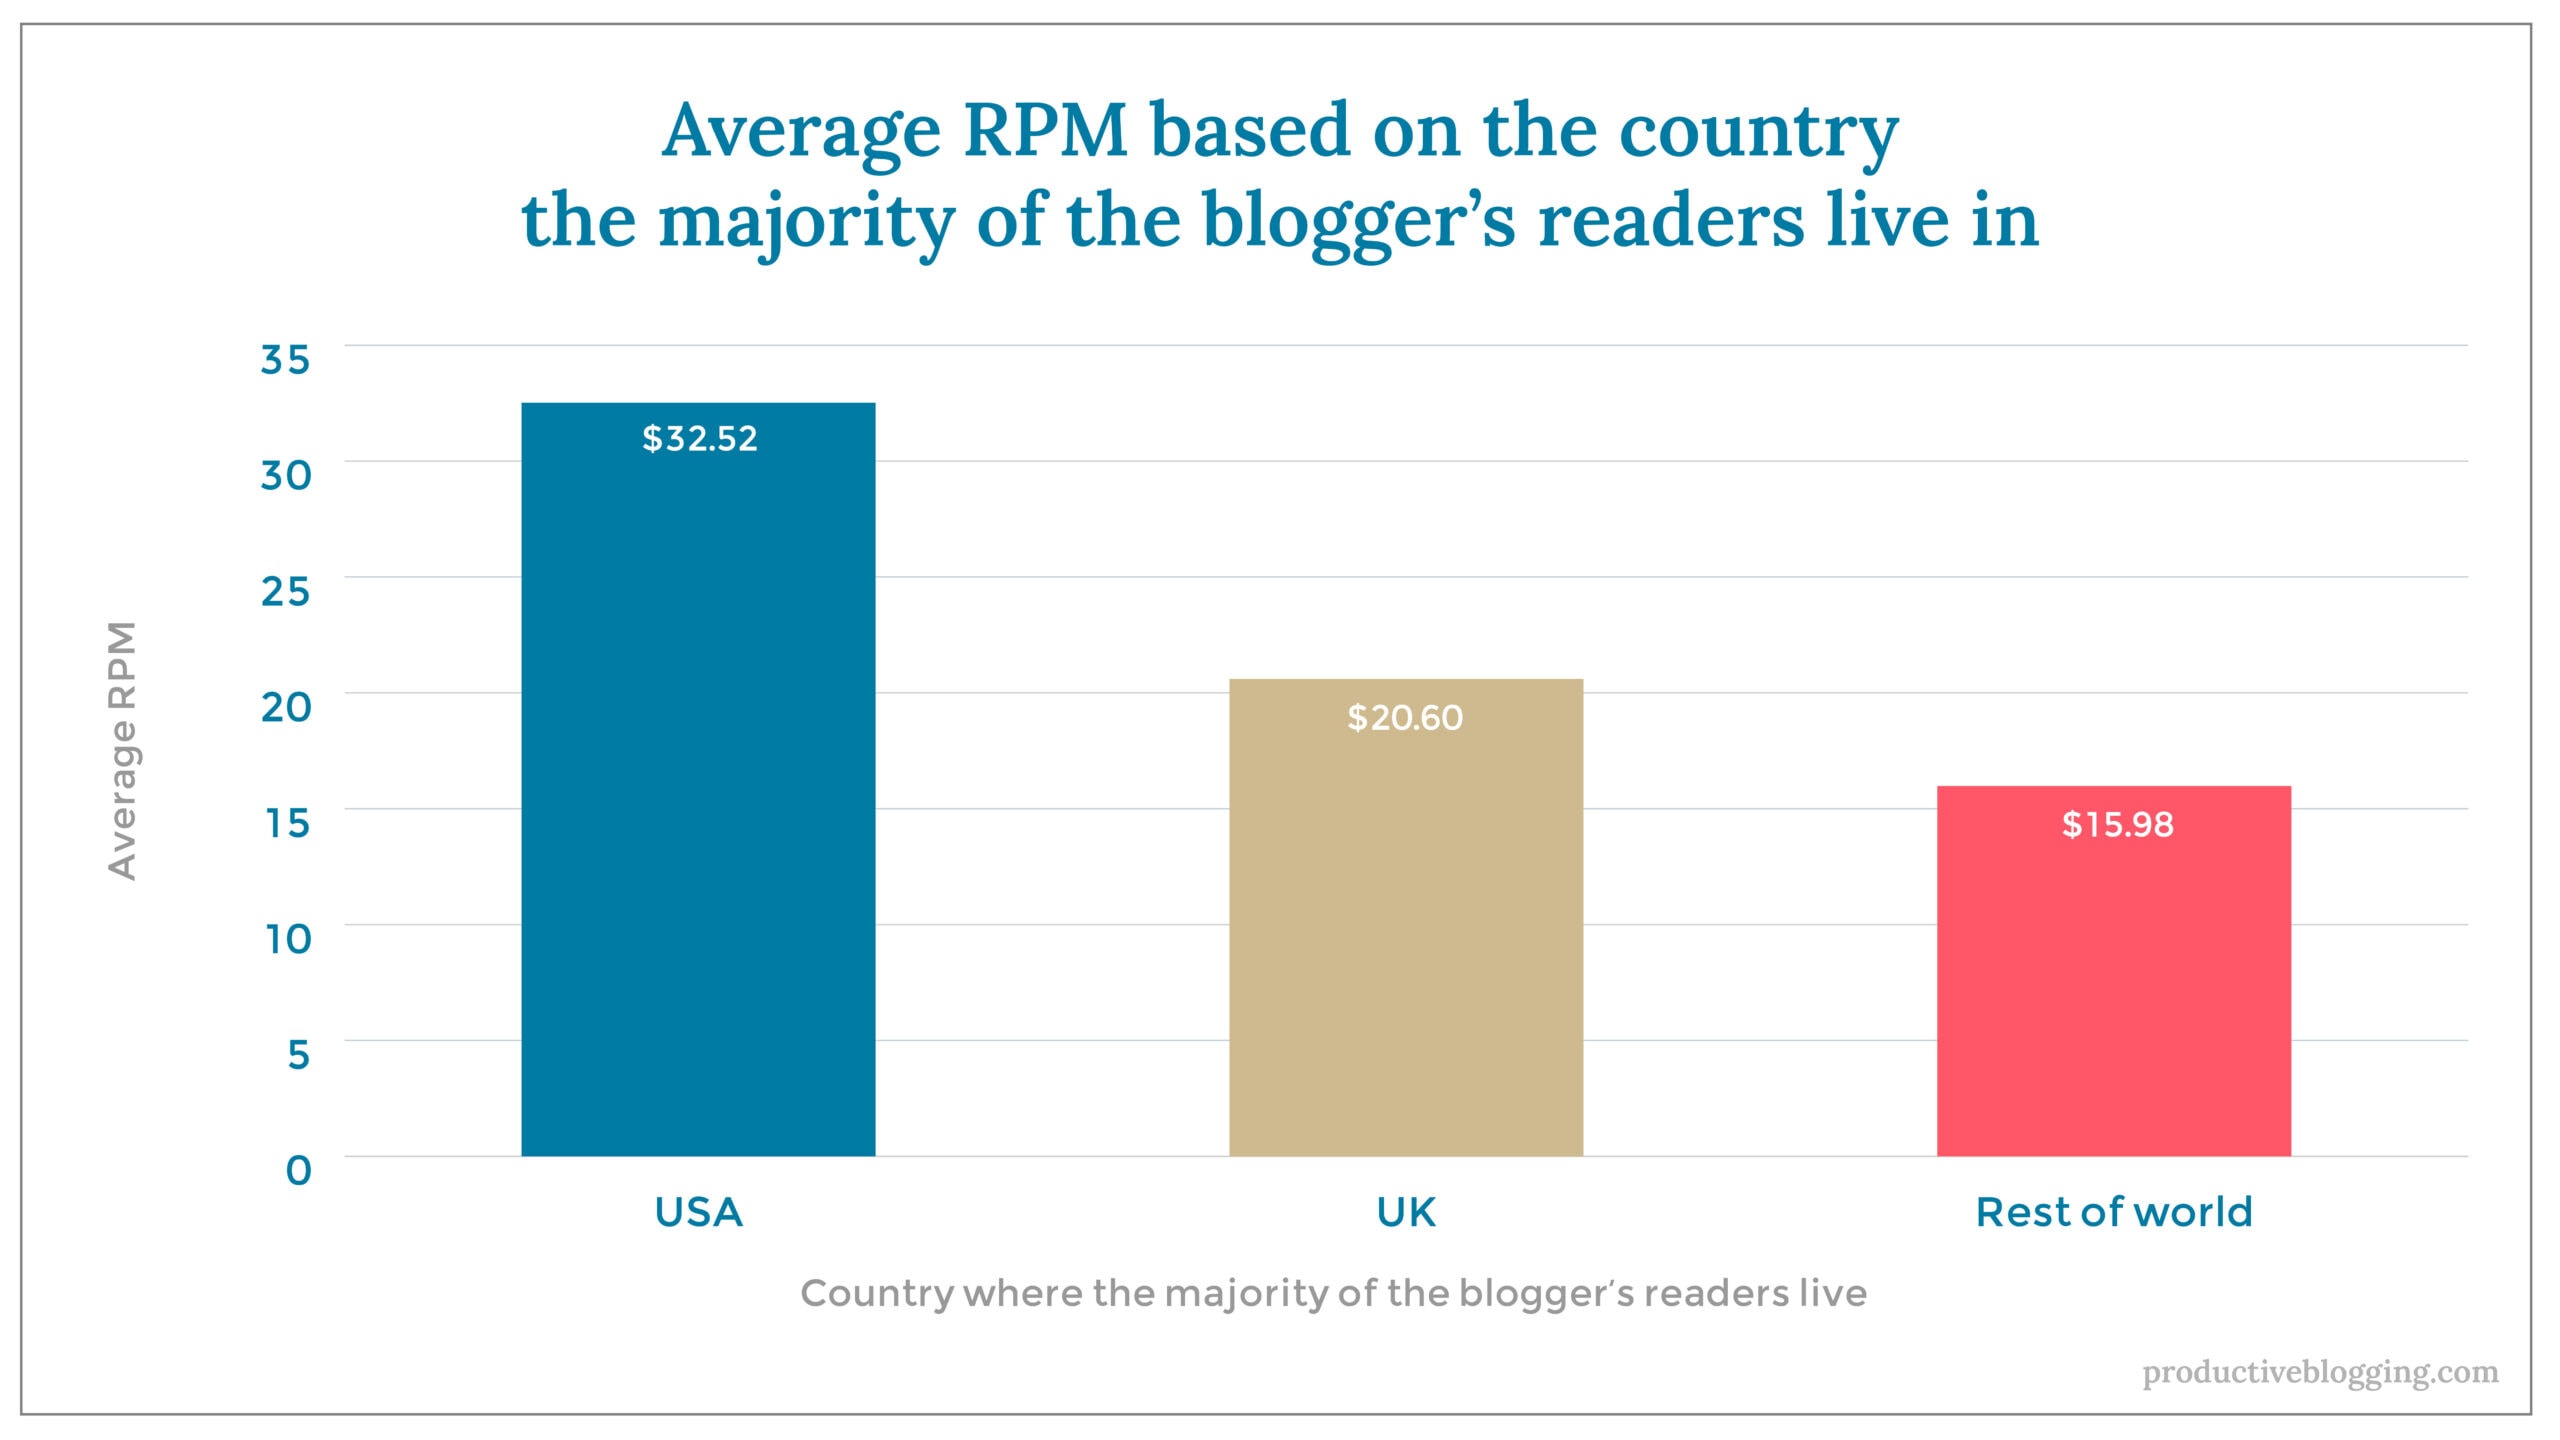 Average RPM based on the country the majority of the blogger’s readers live inX axis: Country where the majority of the blogger’s readers liveY axis: Average RPMUSA			$32.52UK			$20.60Rest of world		$15.98